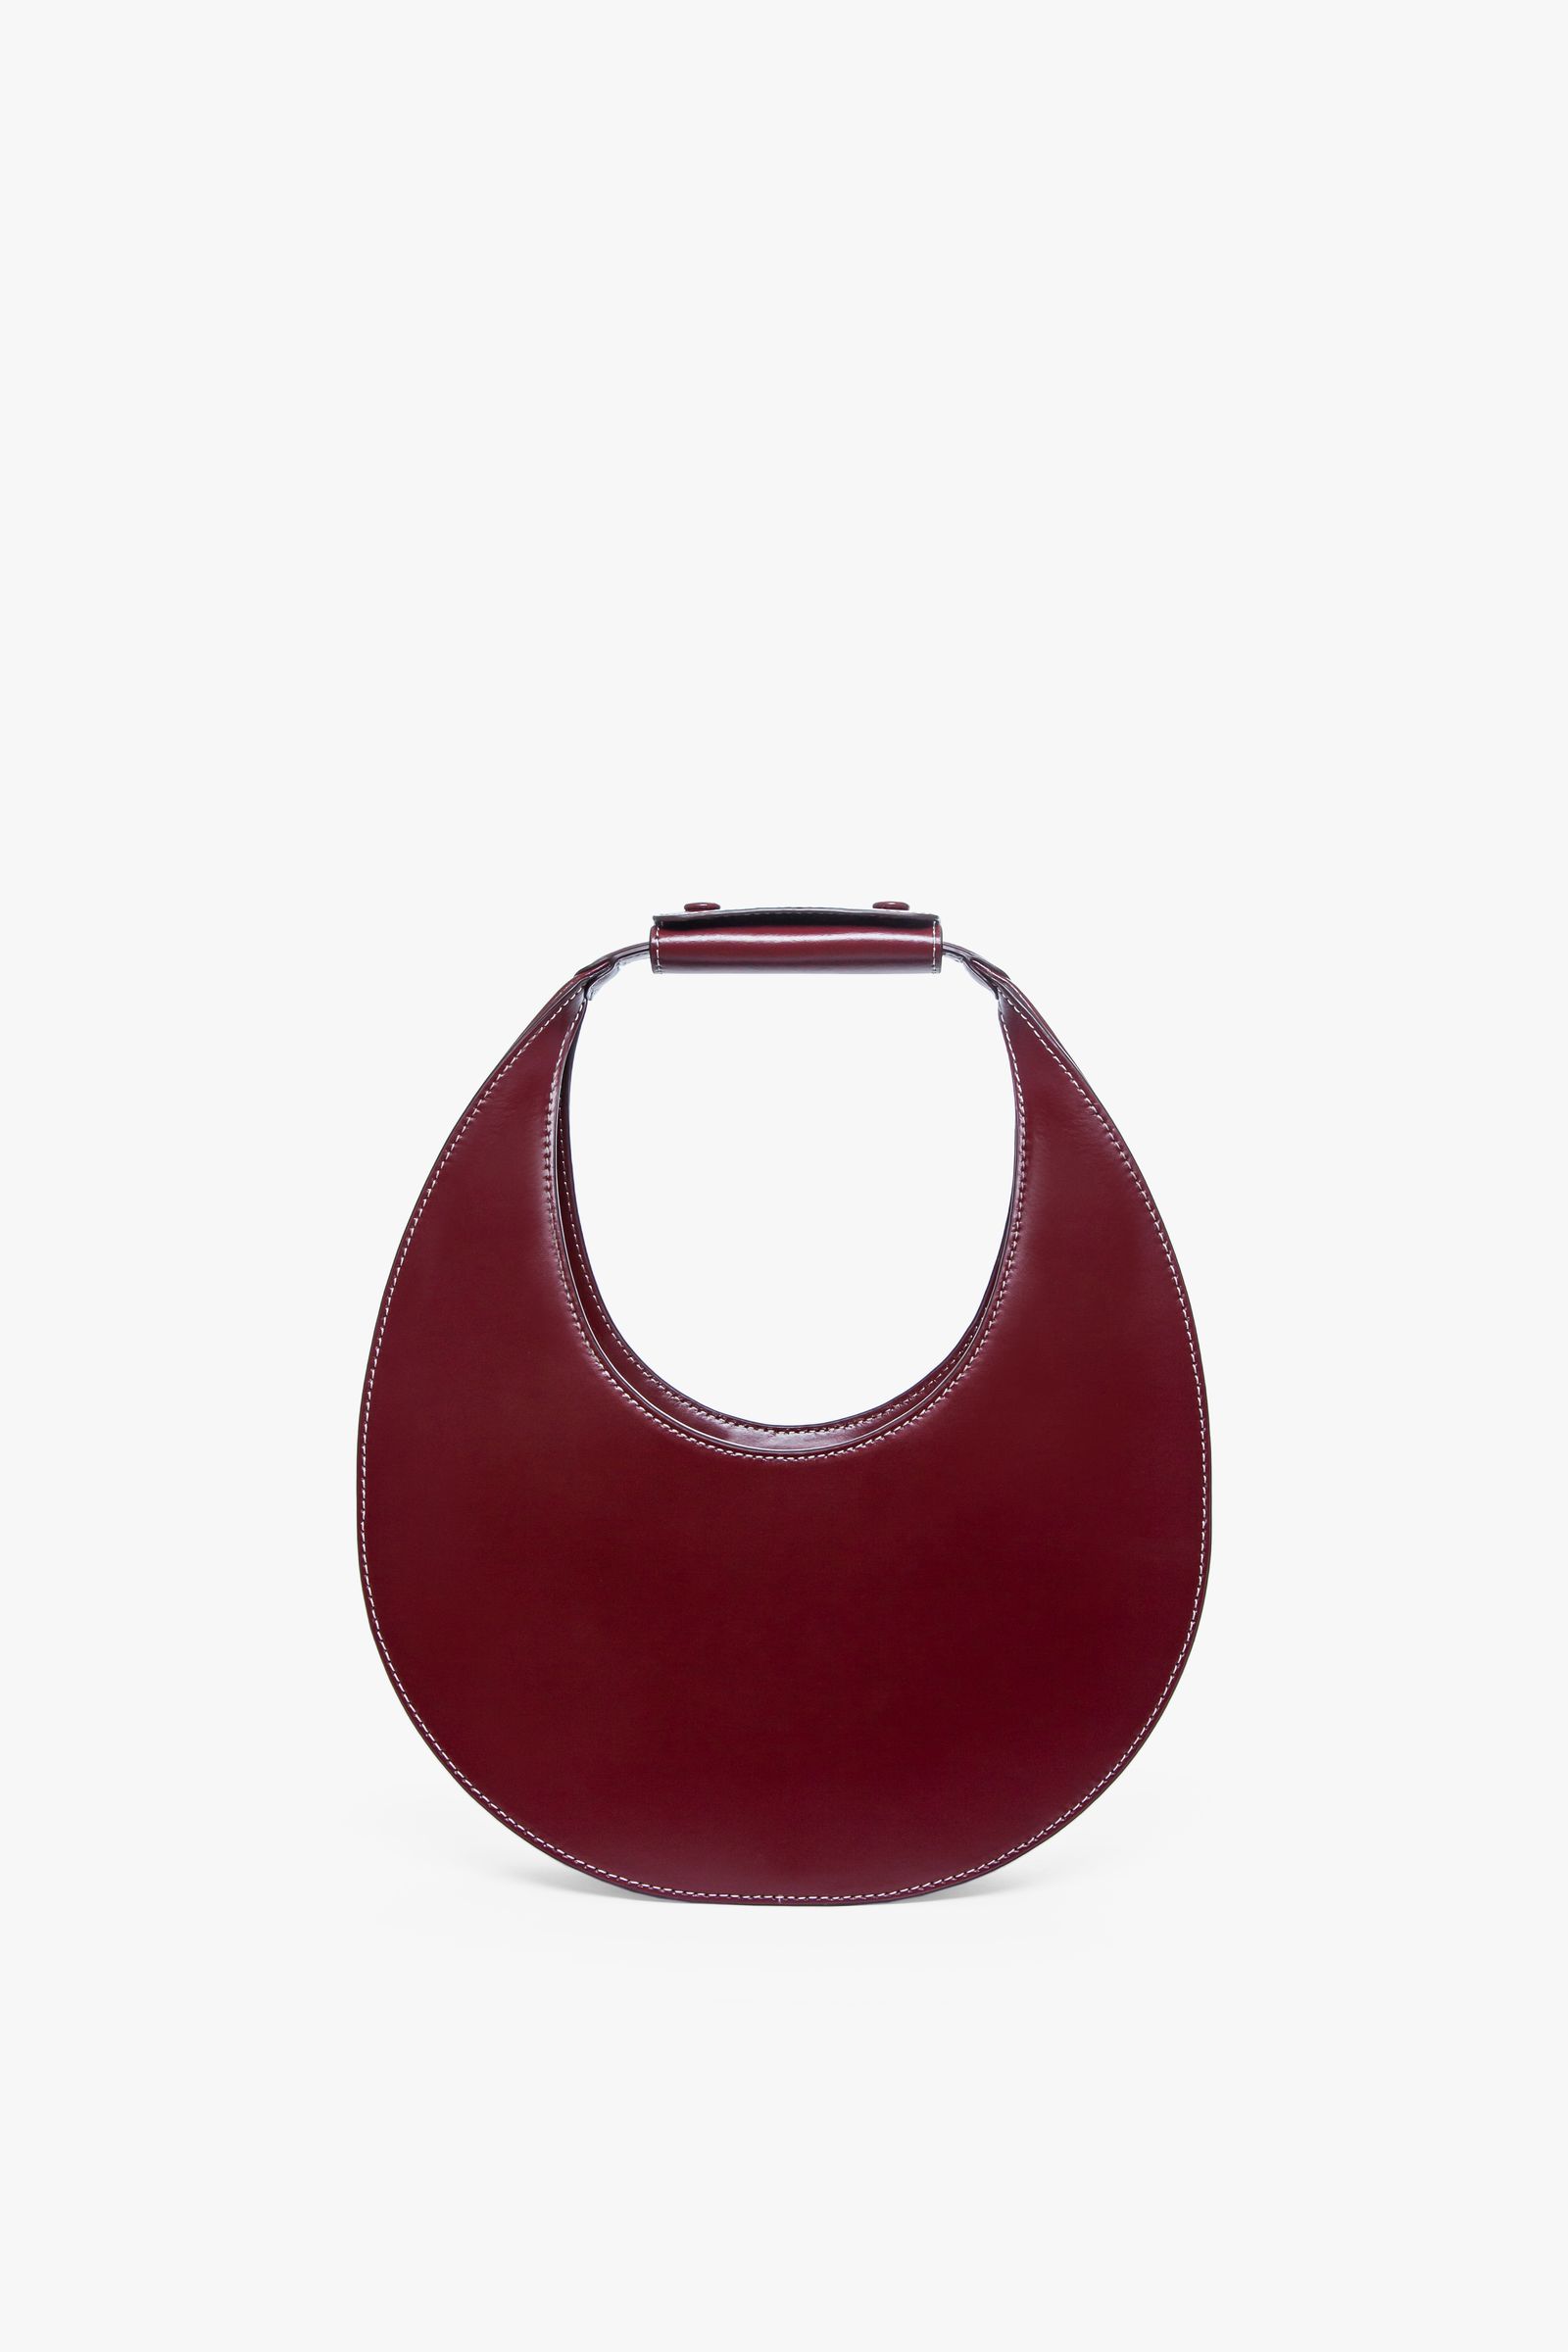 The Staud Moon Bag Is Set to Become Fall 2019's It Bag | Who What Wear